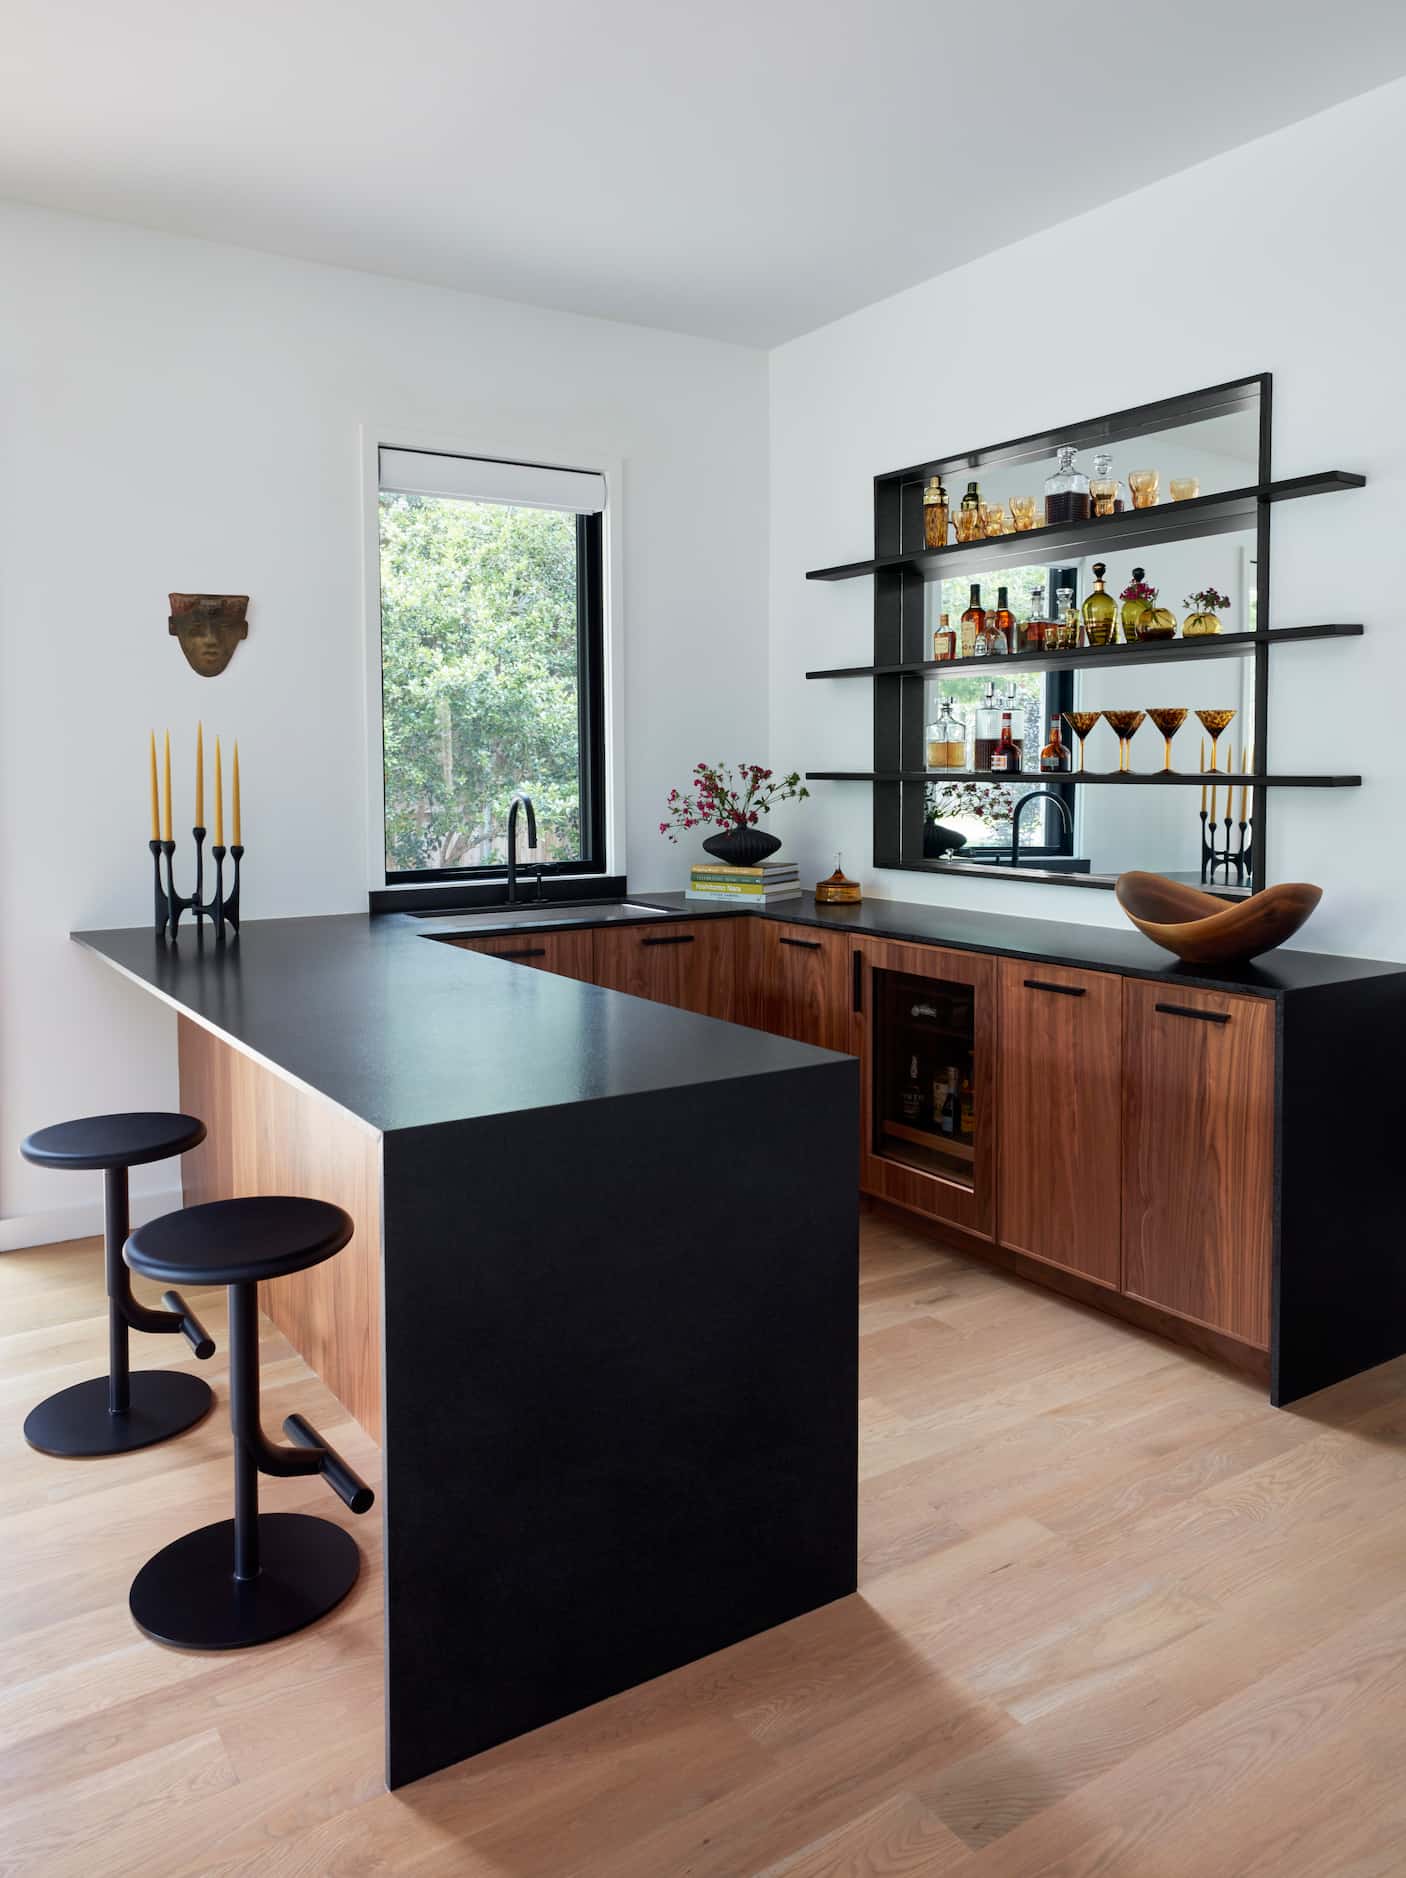 Home wet bar with black waterfall-edge countertop, wood cabinets and open shelving for...